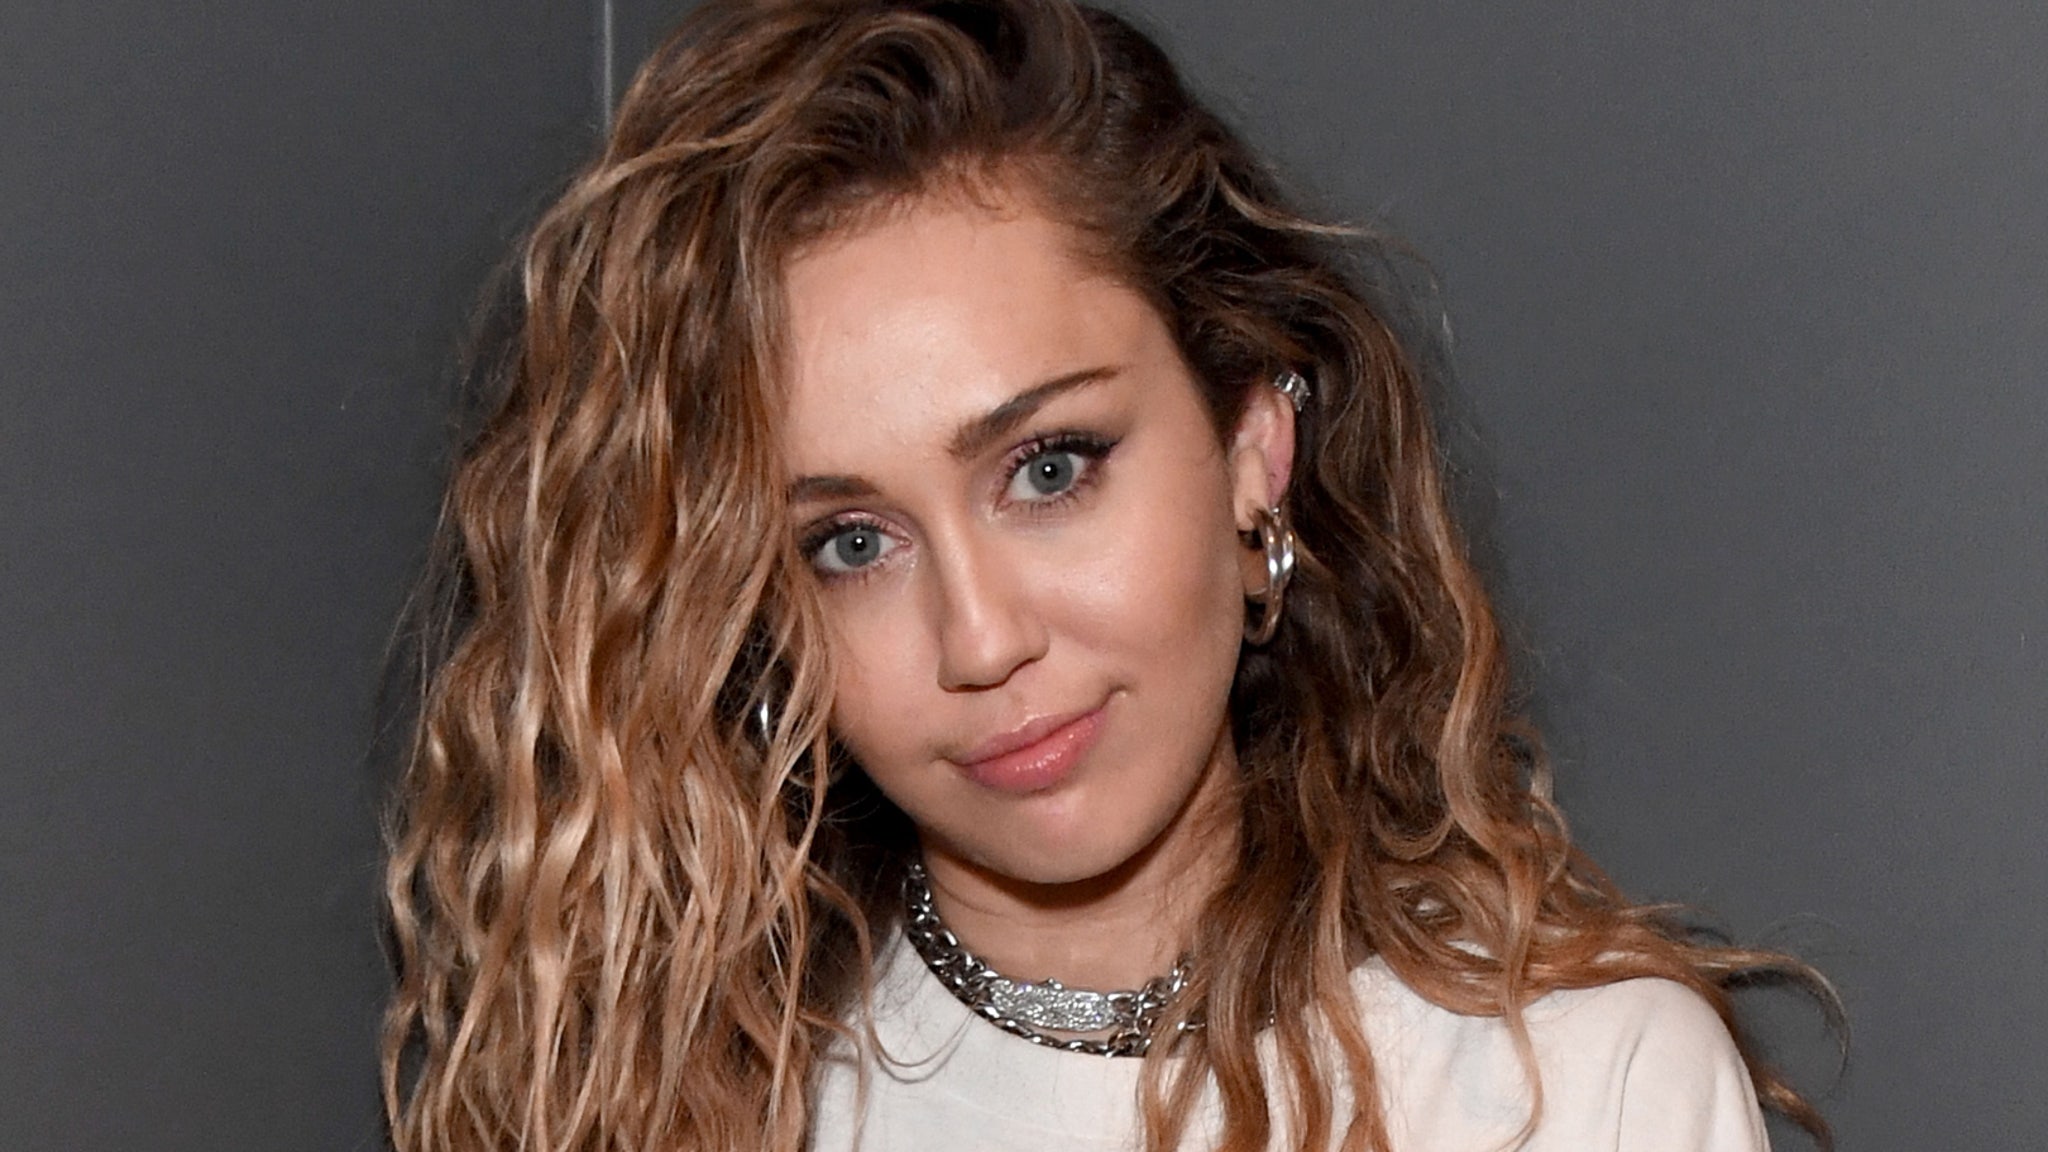 Miley Cyrus 23 Other Celebrities Reveal When They Lost Their Virginity